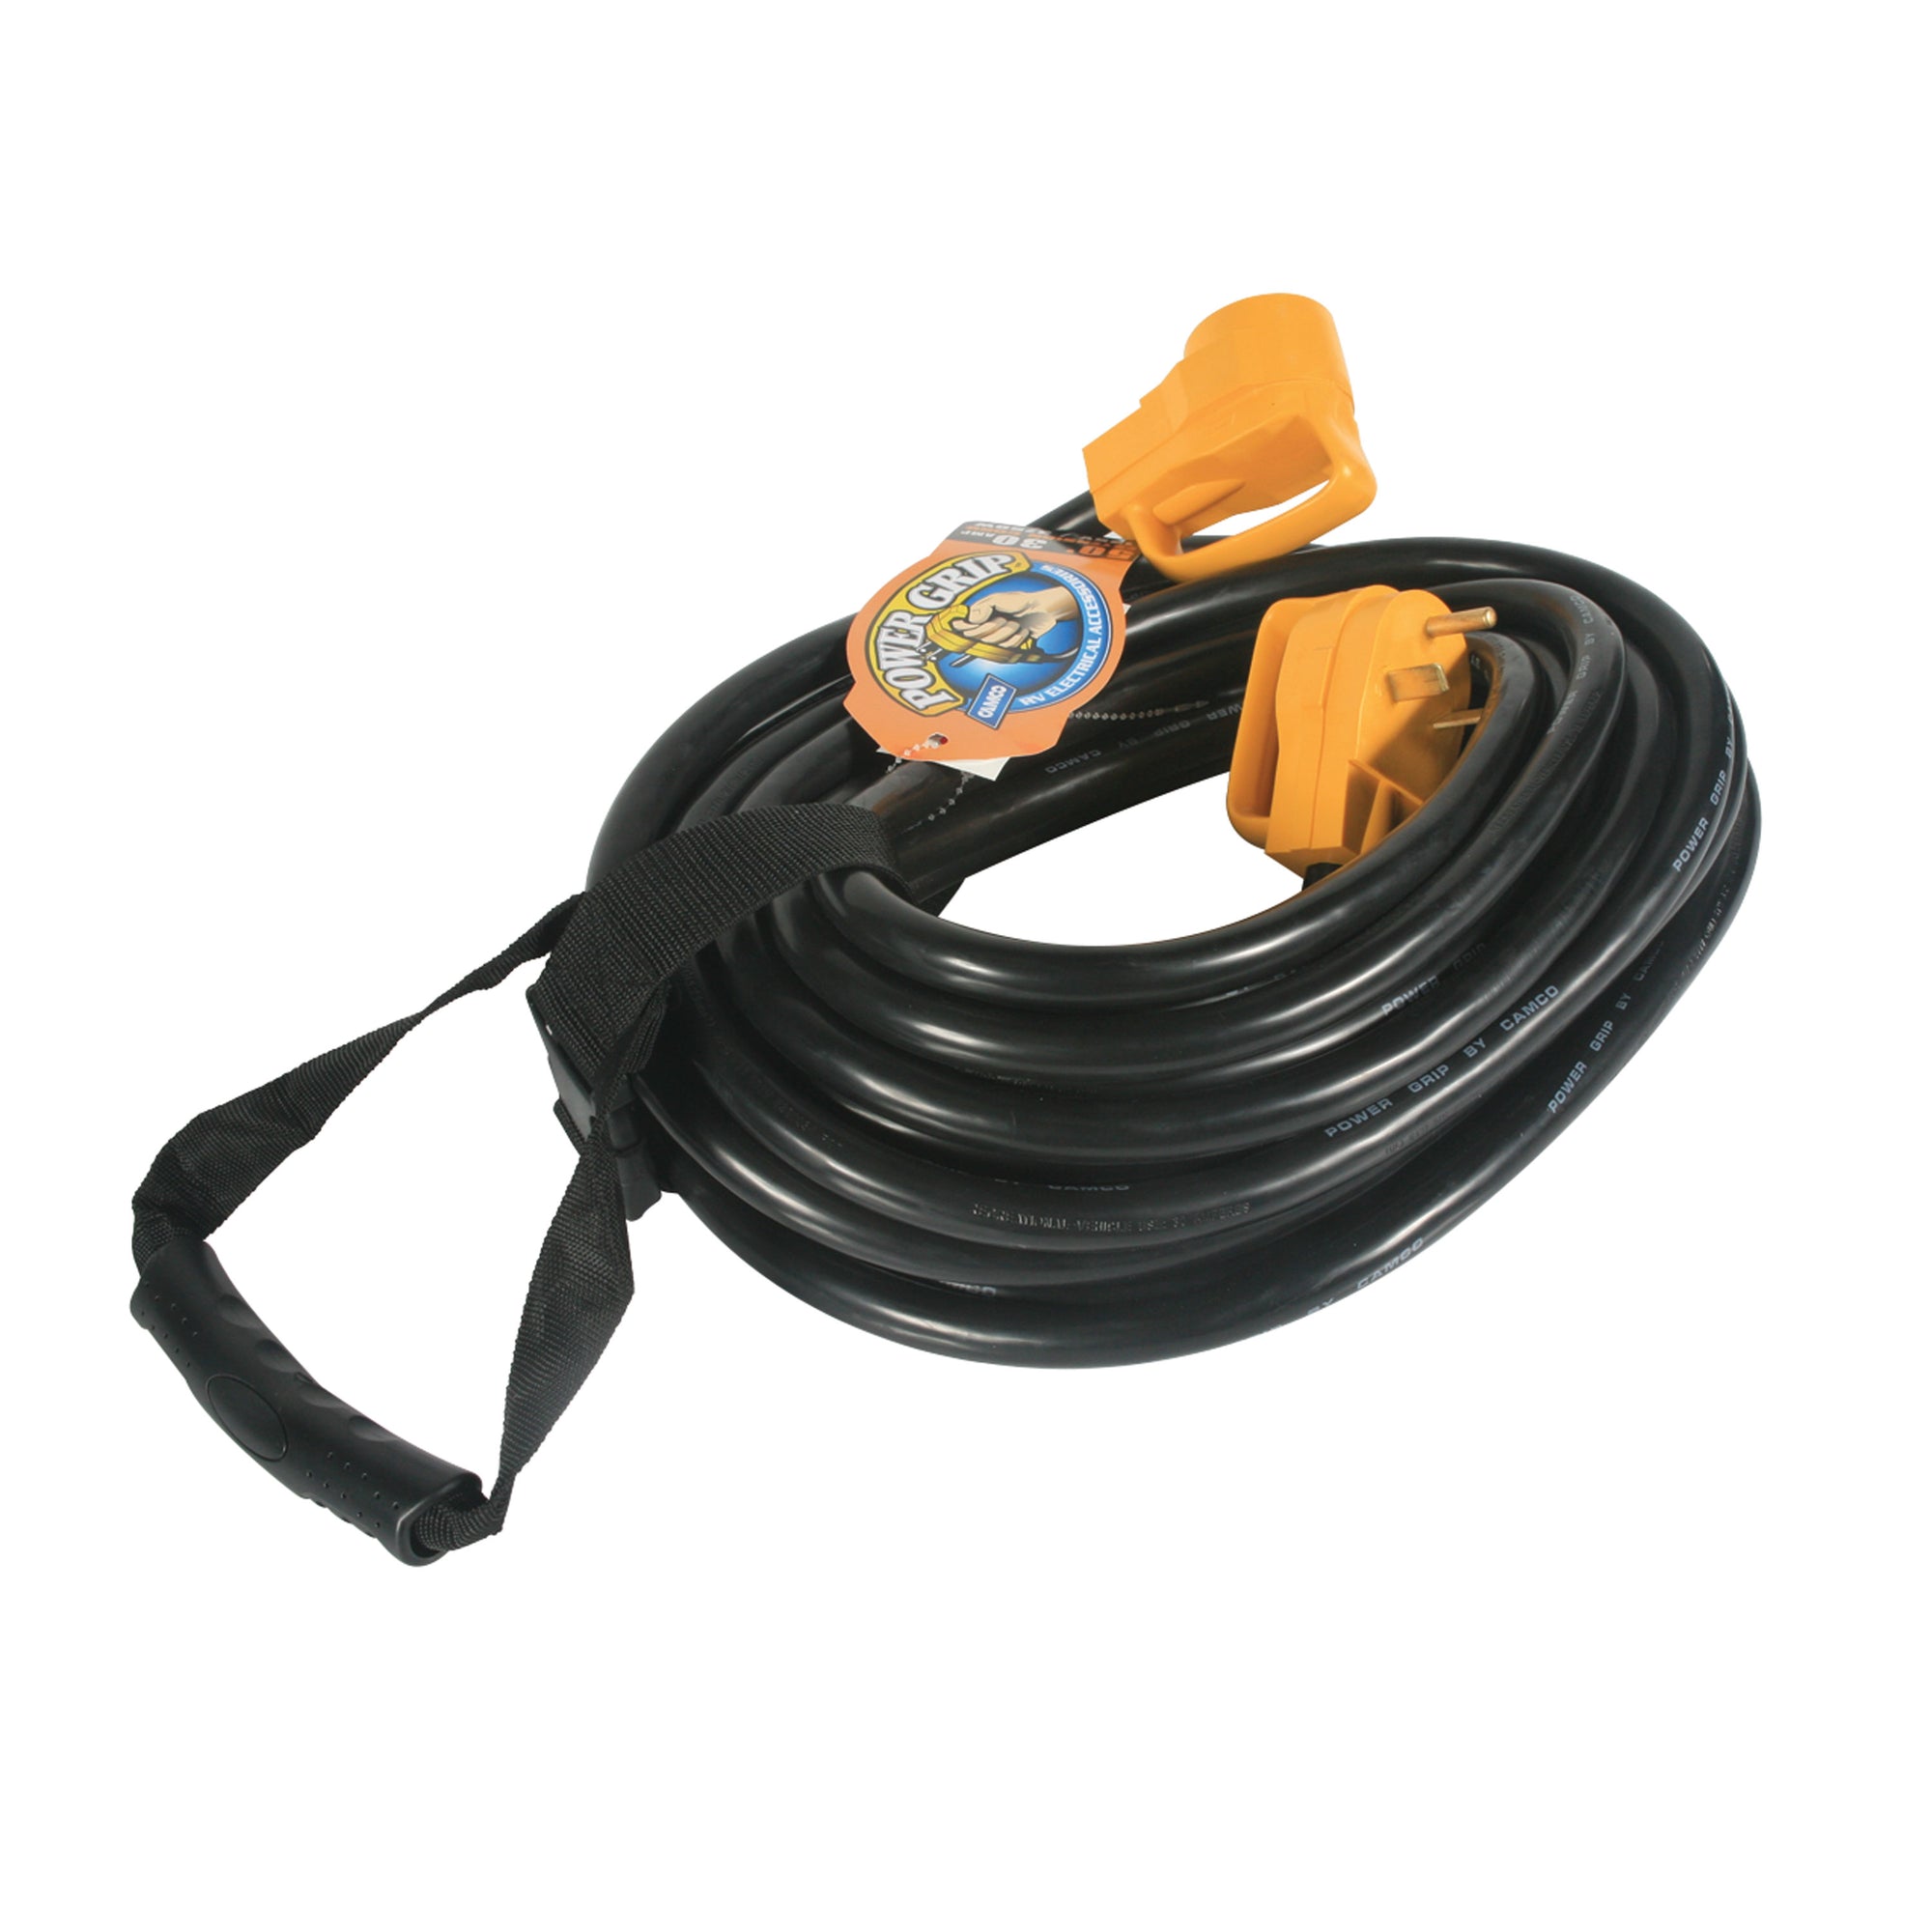 Camco 55197 30 Amp Power Grip Extension Cord 50'